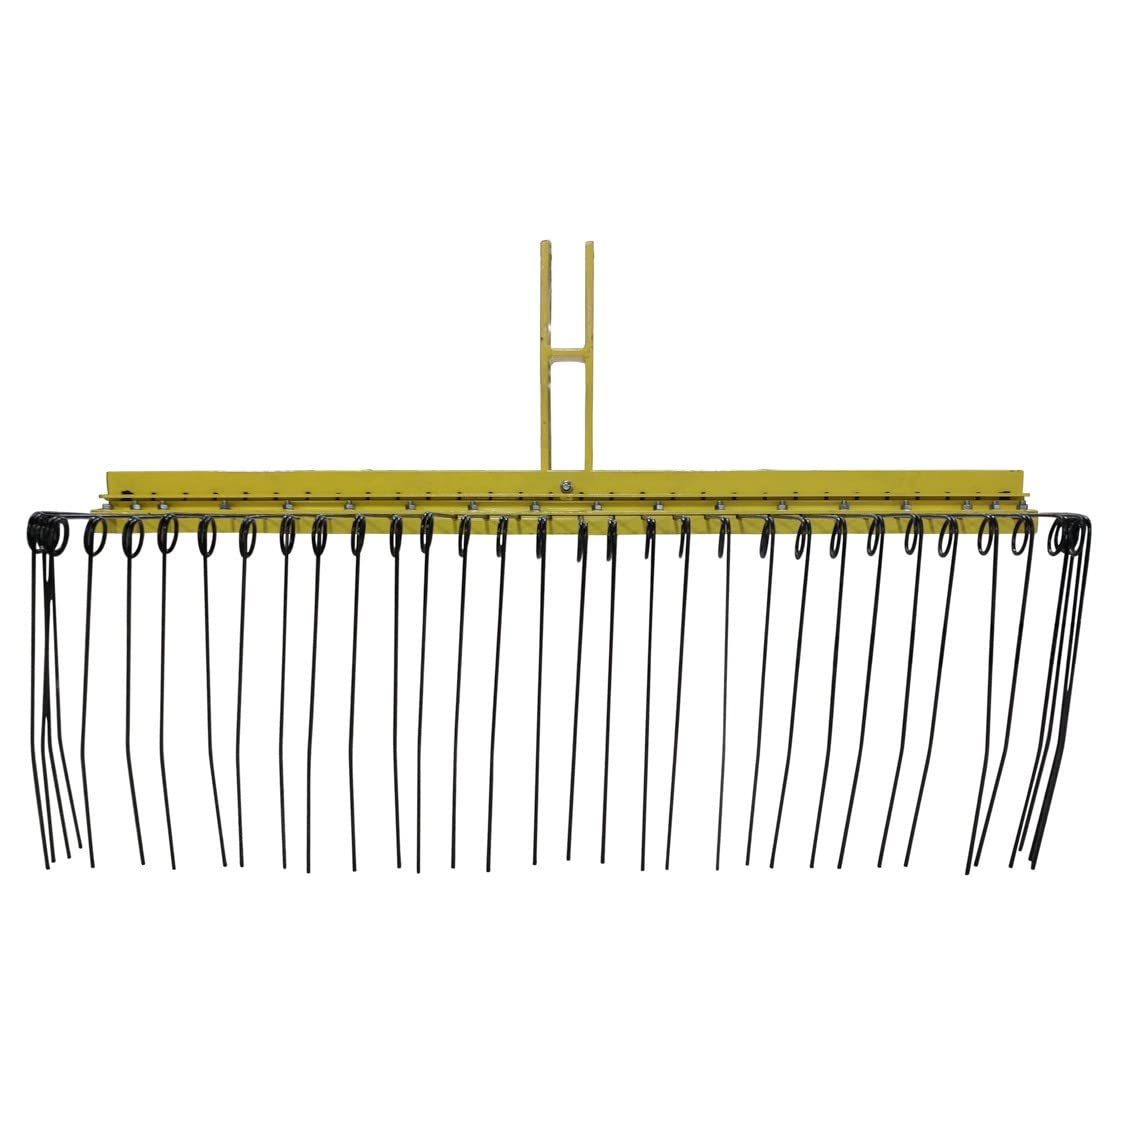 Titan Attachments 3 Point 6 FT Pine Straw Needle Rake, Category 1 Tractors, Coil Spring Tines, Drag-Behind Landscape Rake